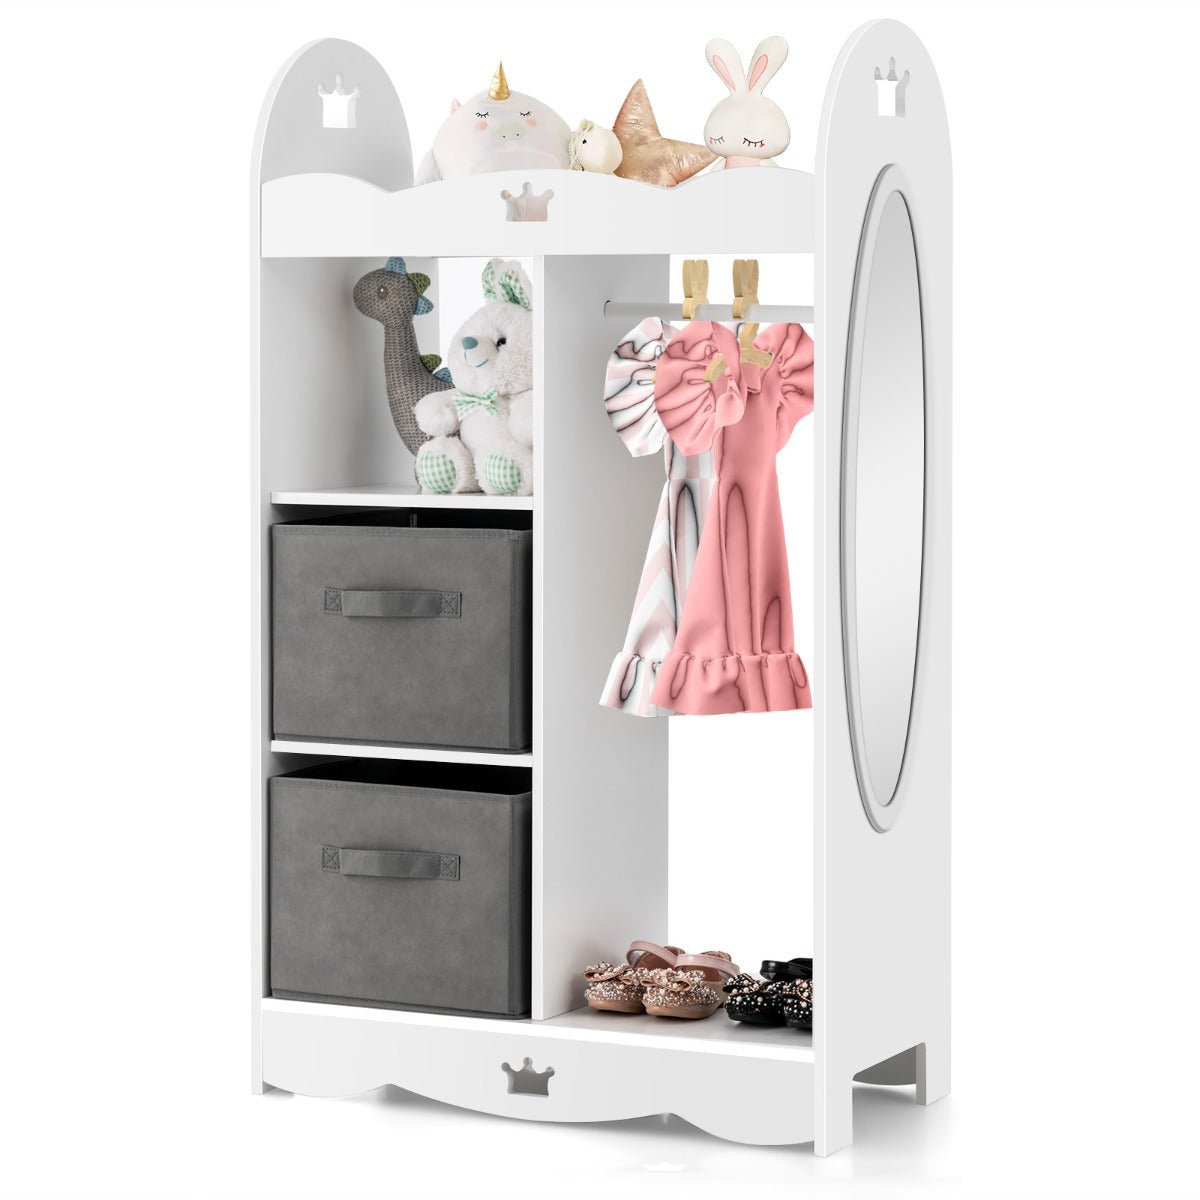 Kids Room Armoire Dresser with Mirror - Organize and Reflect in Style